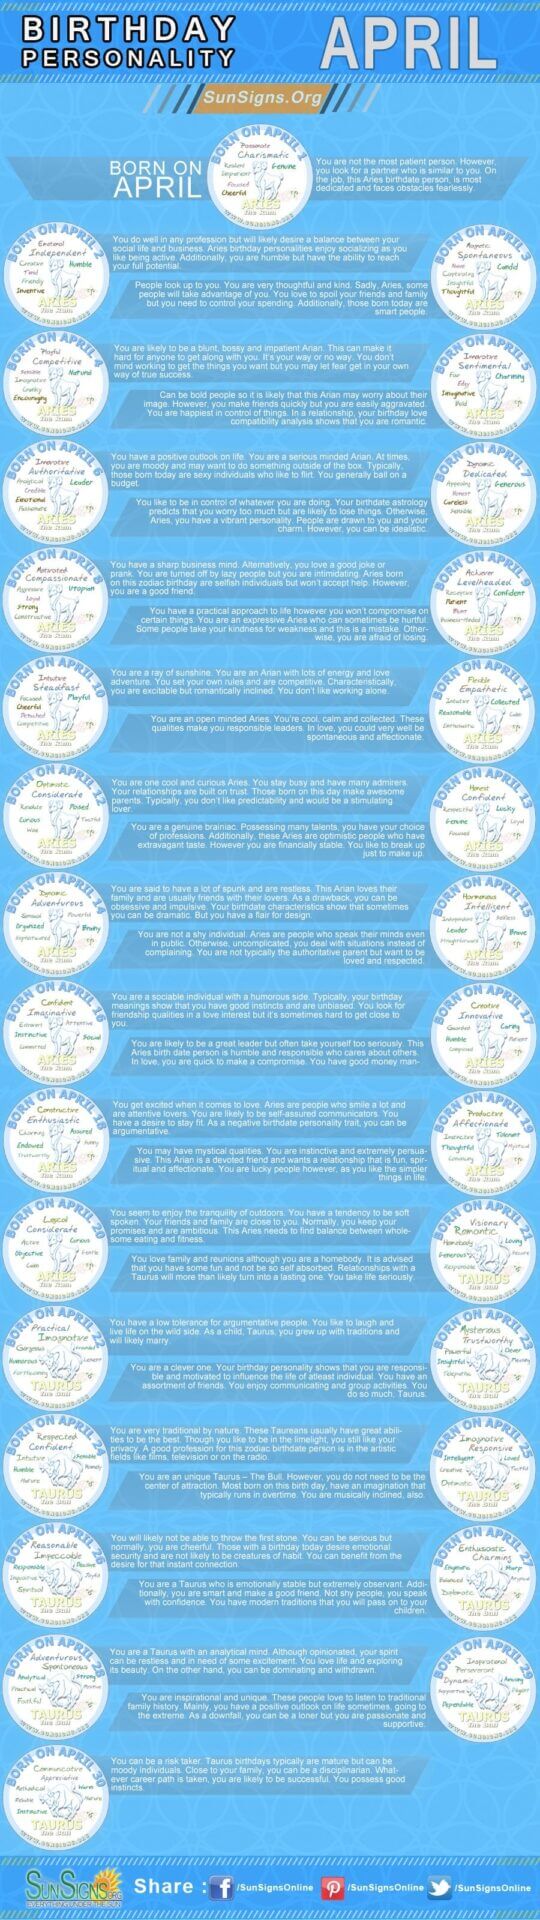 infographics for people born in april. Zodiac sign aries and taurus. birthday personality for each day of april